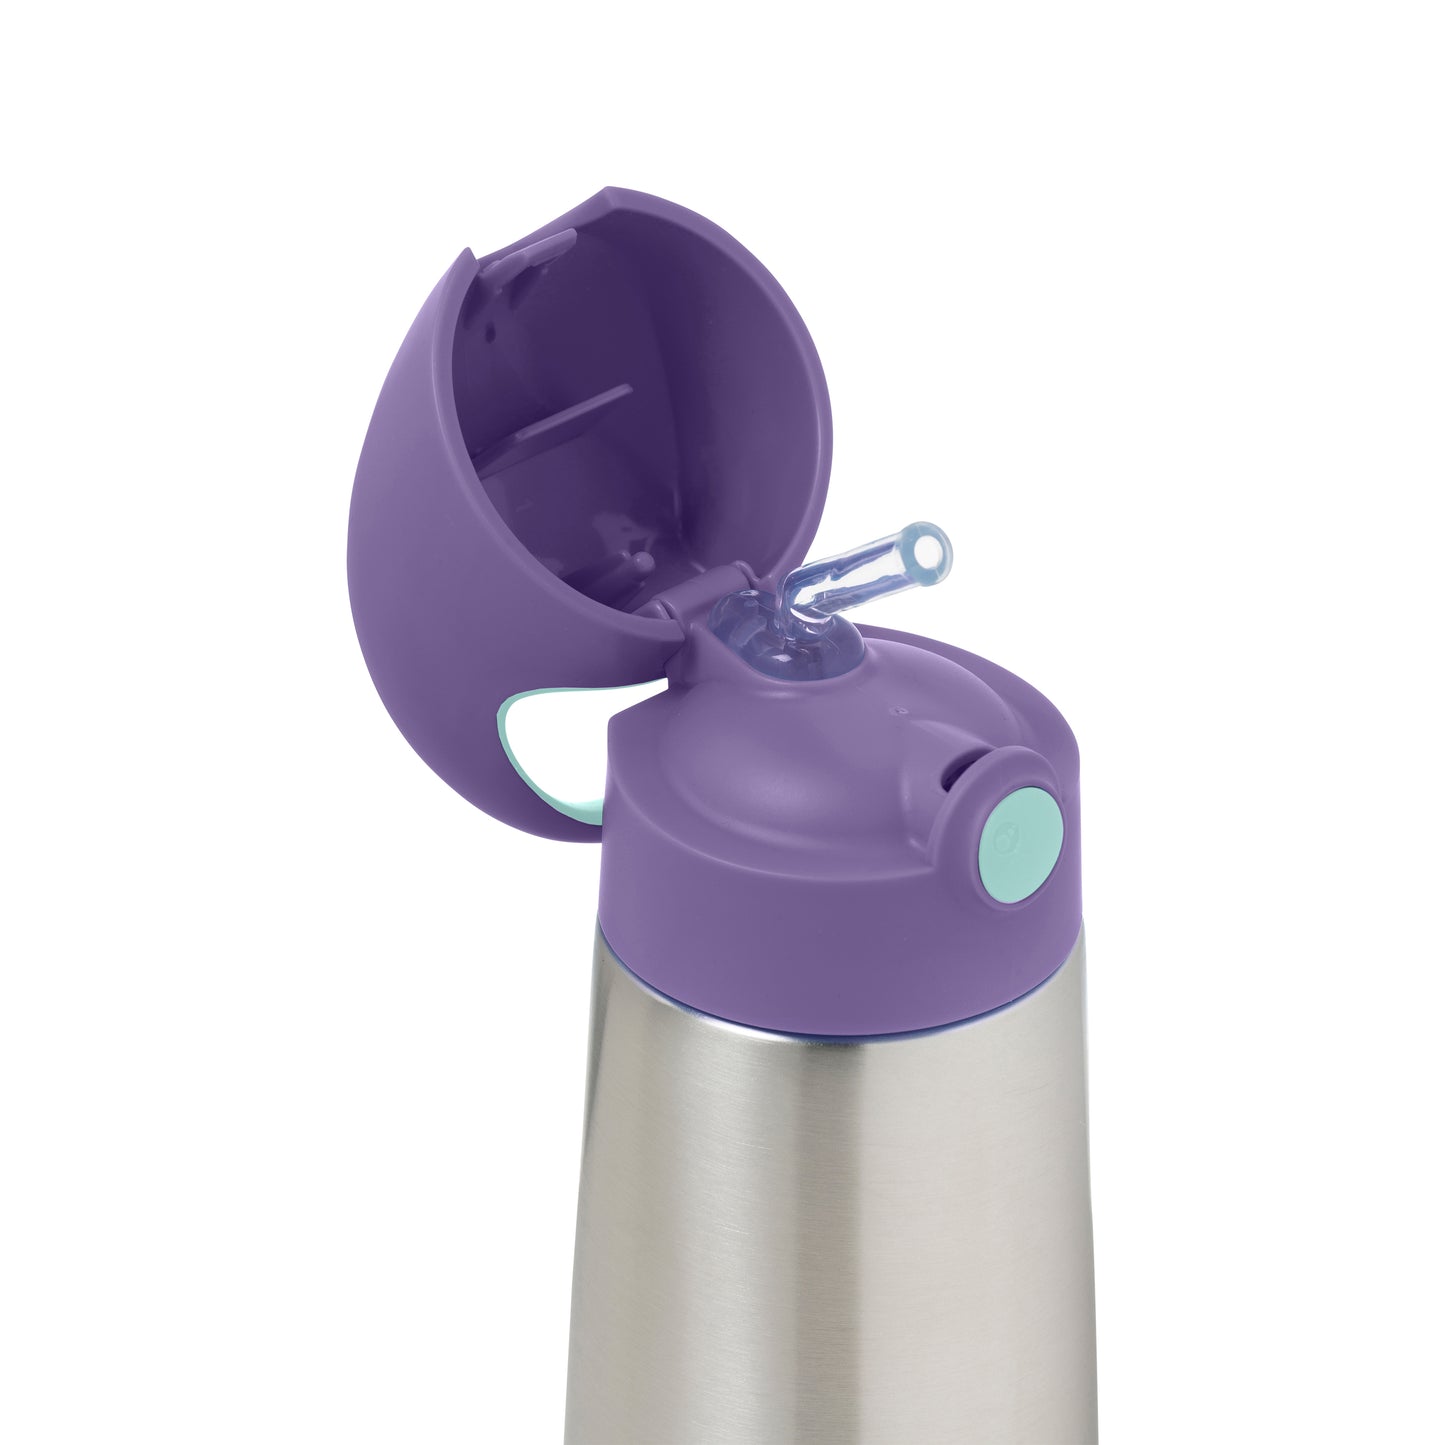 350ml insulated drink bottle - Lilac Pop